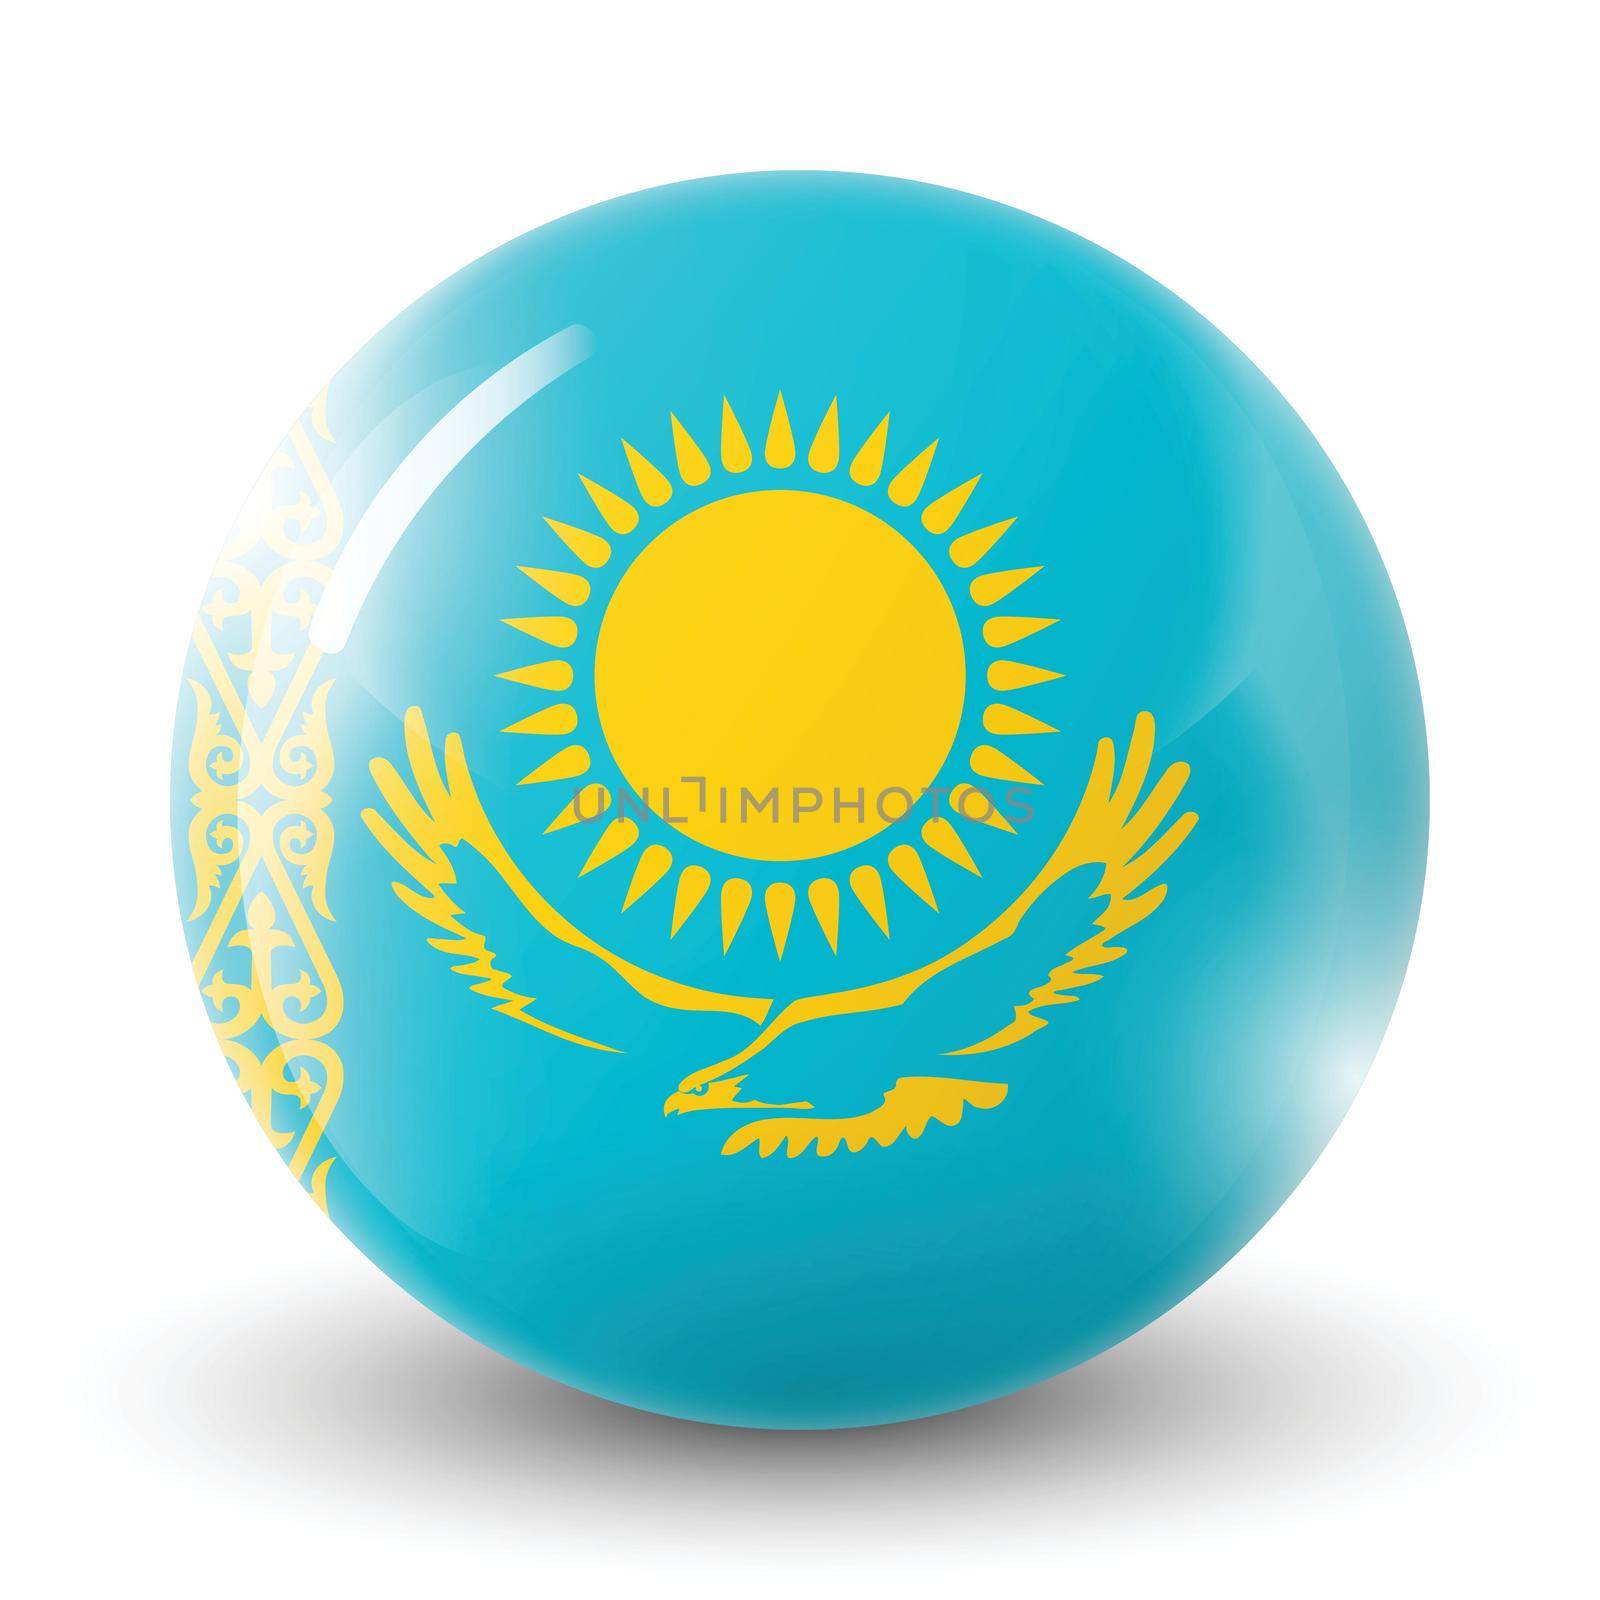 Glass light ball with flag of Kazakhstan. Round sphere, template icon. Kazakh national symbol. Glossy realistic ball, 3D abstract vector illustration highlighted on a white background. Big bubble.